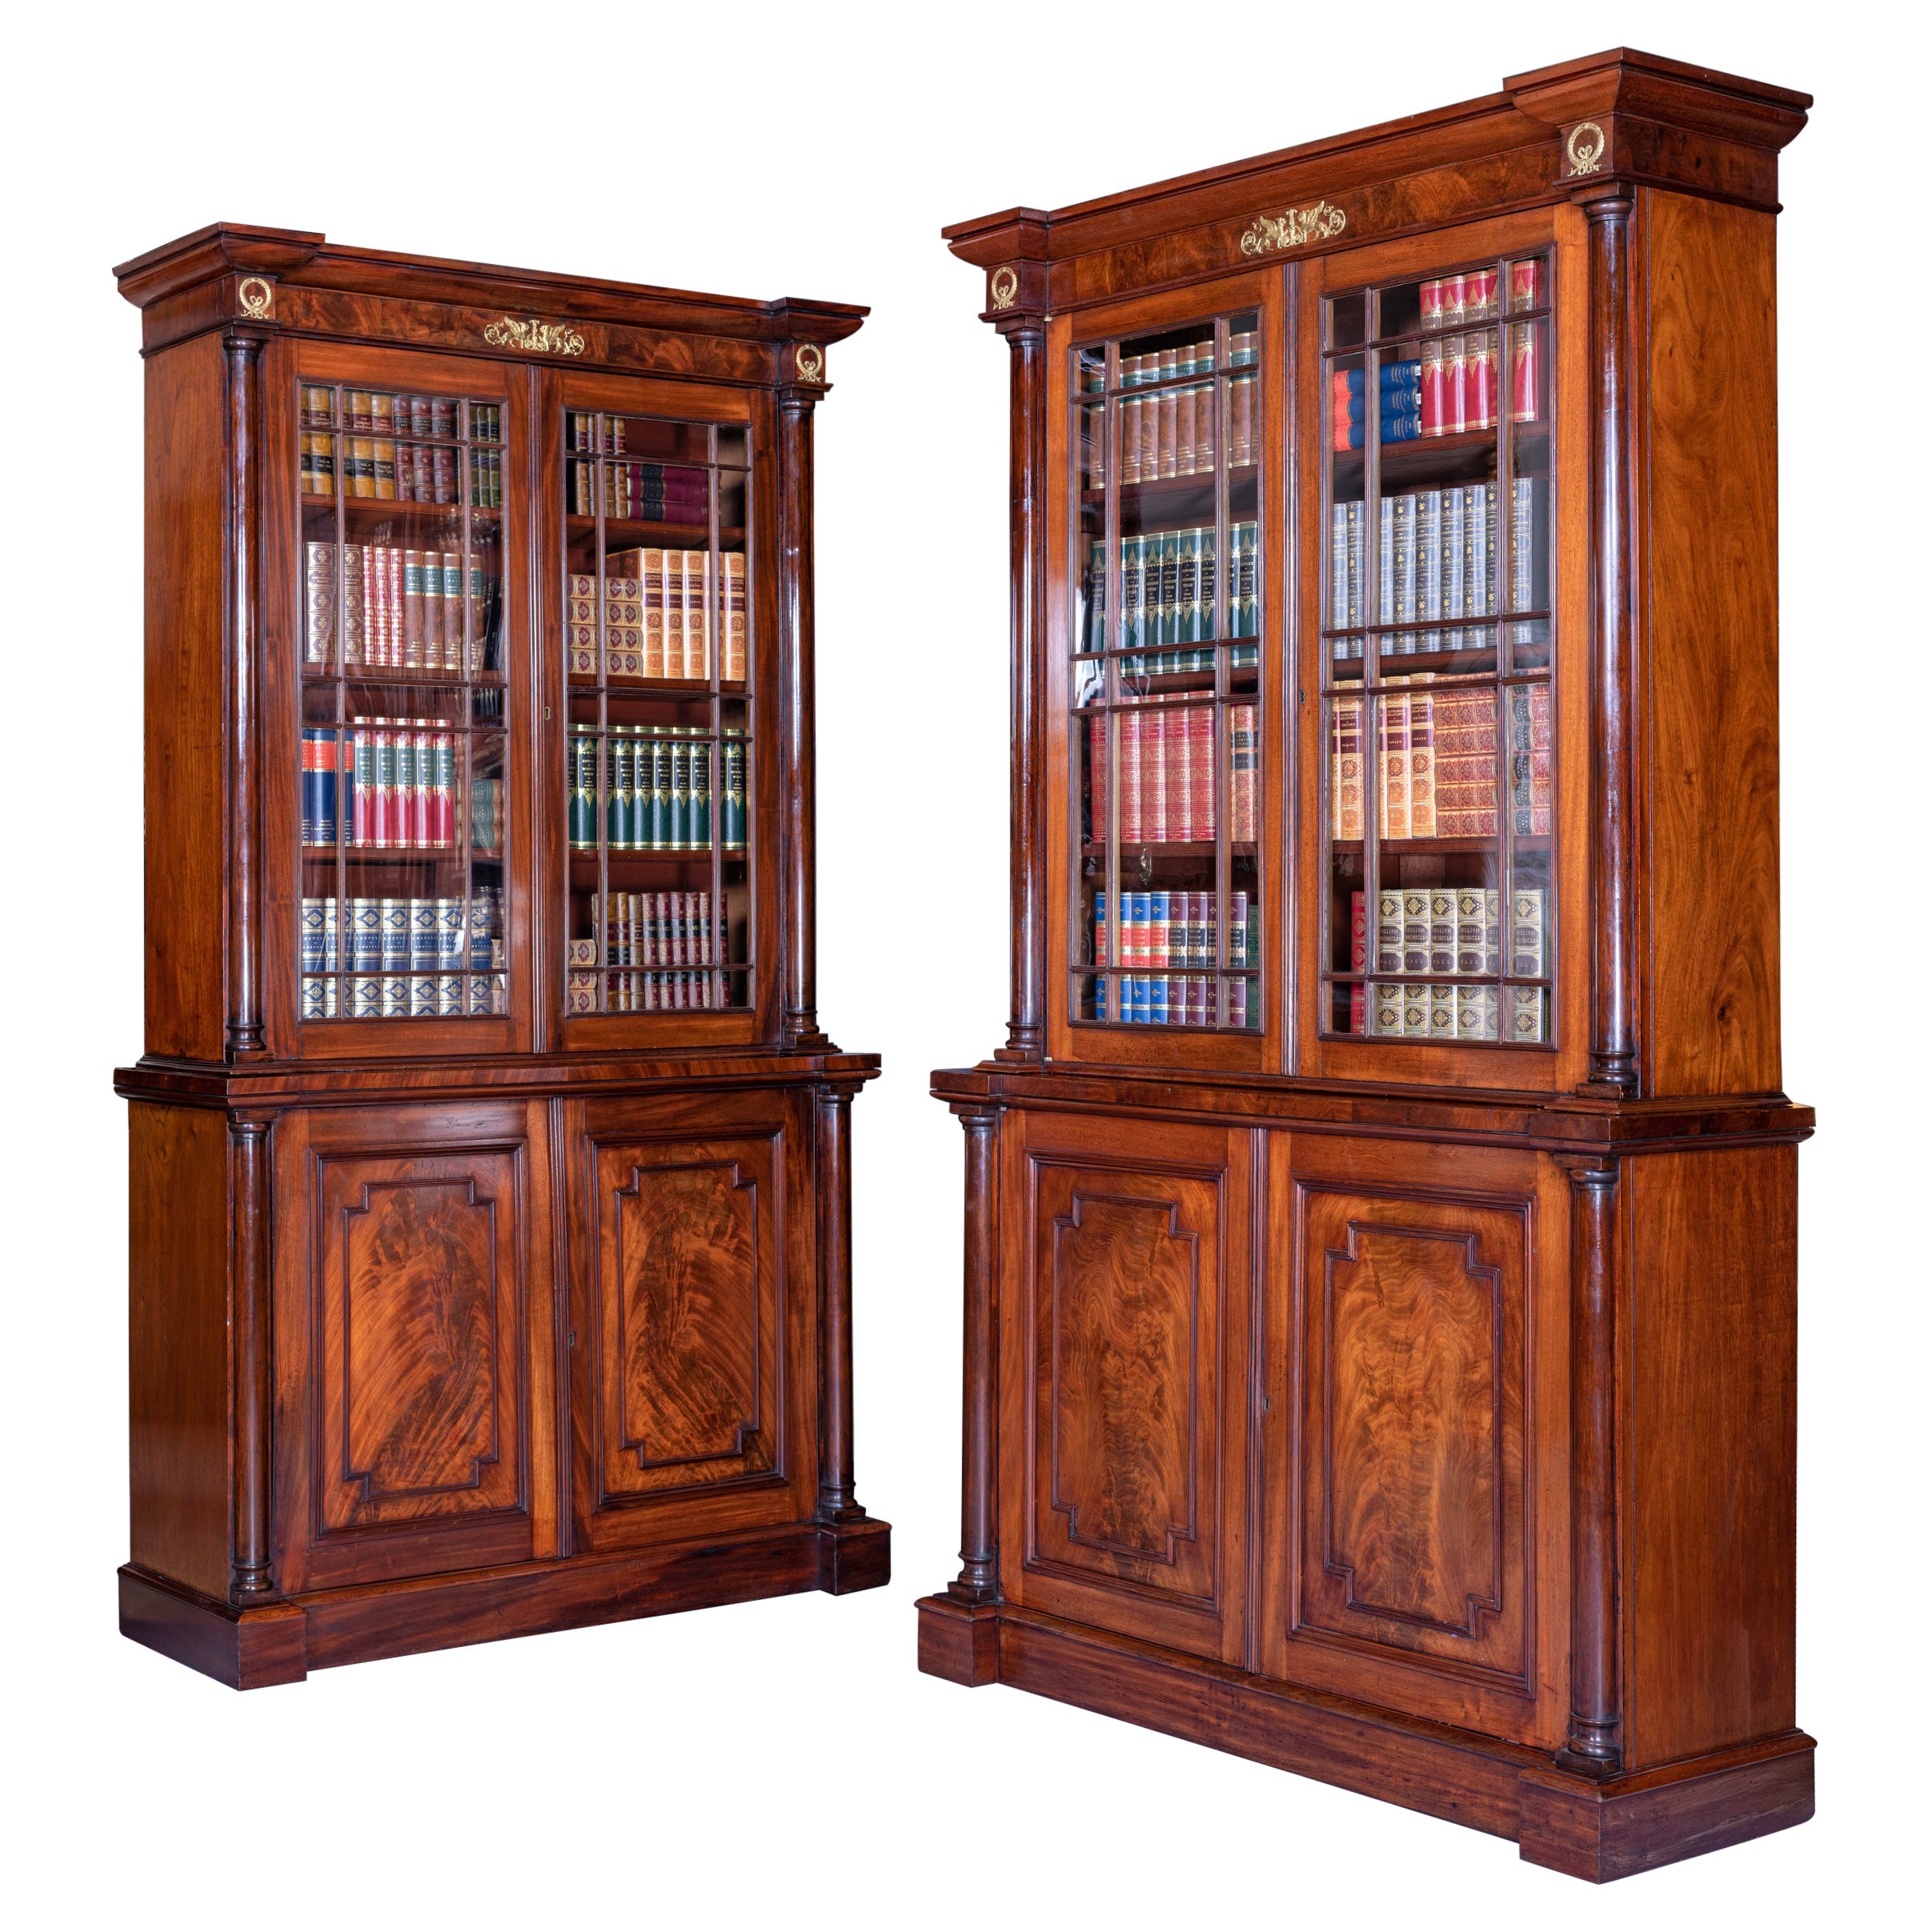 Pair of Early 19th Century Mahogany Bookcases Attributed to Gillows of Lancaster